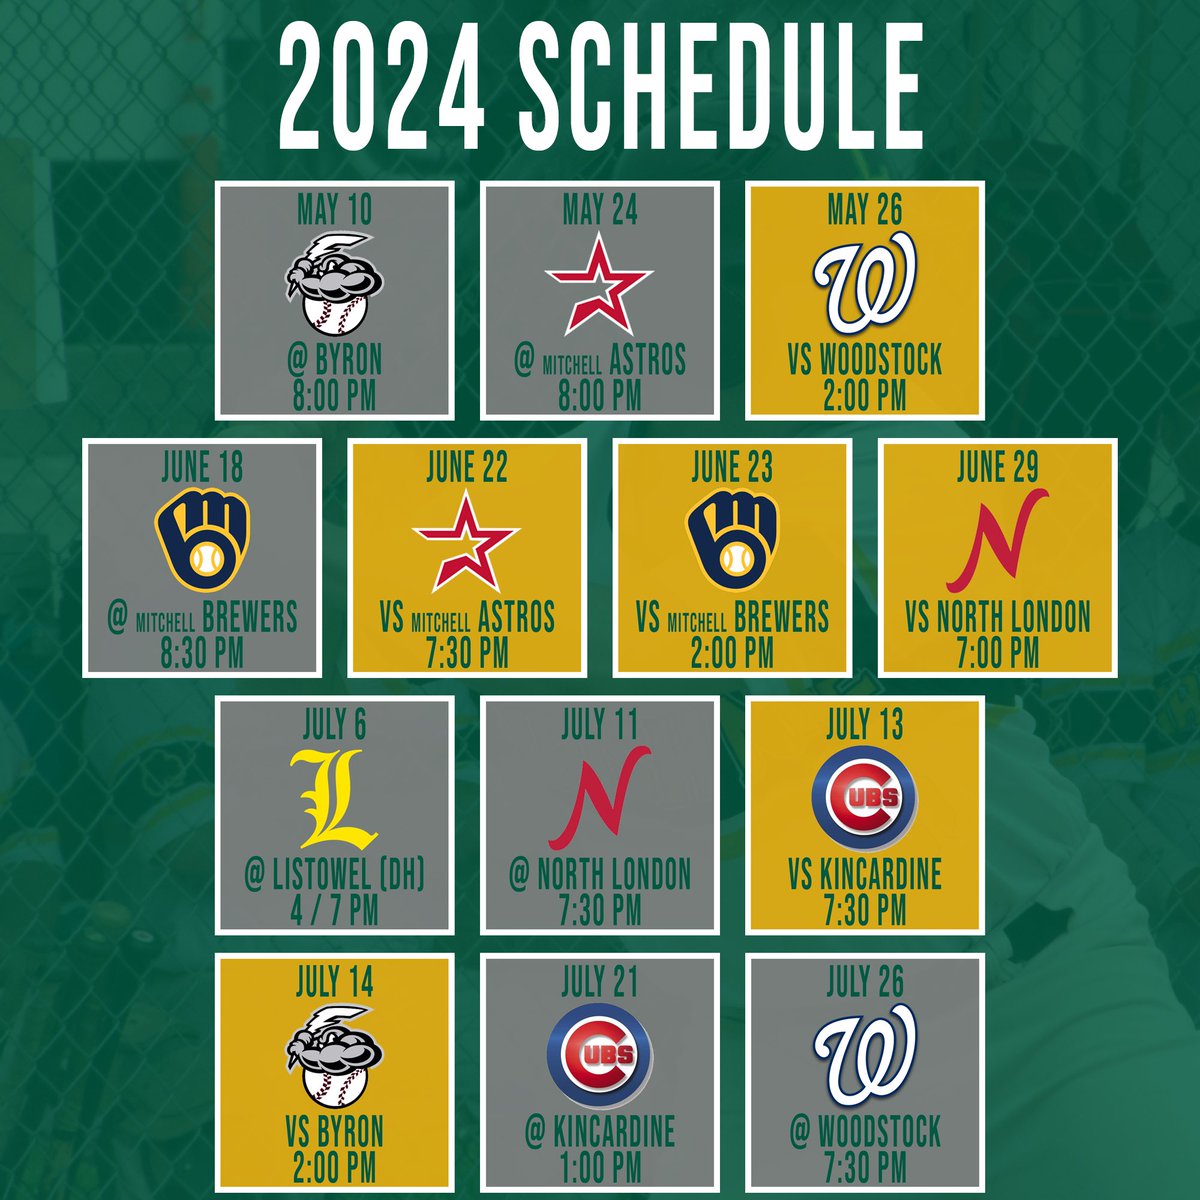 Our complete 2024 schedule! Next game is May 24th in Mitchell! ☘️☘️☘️